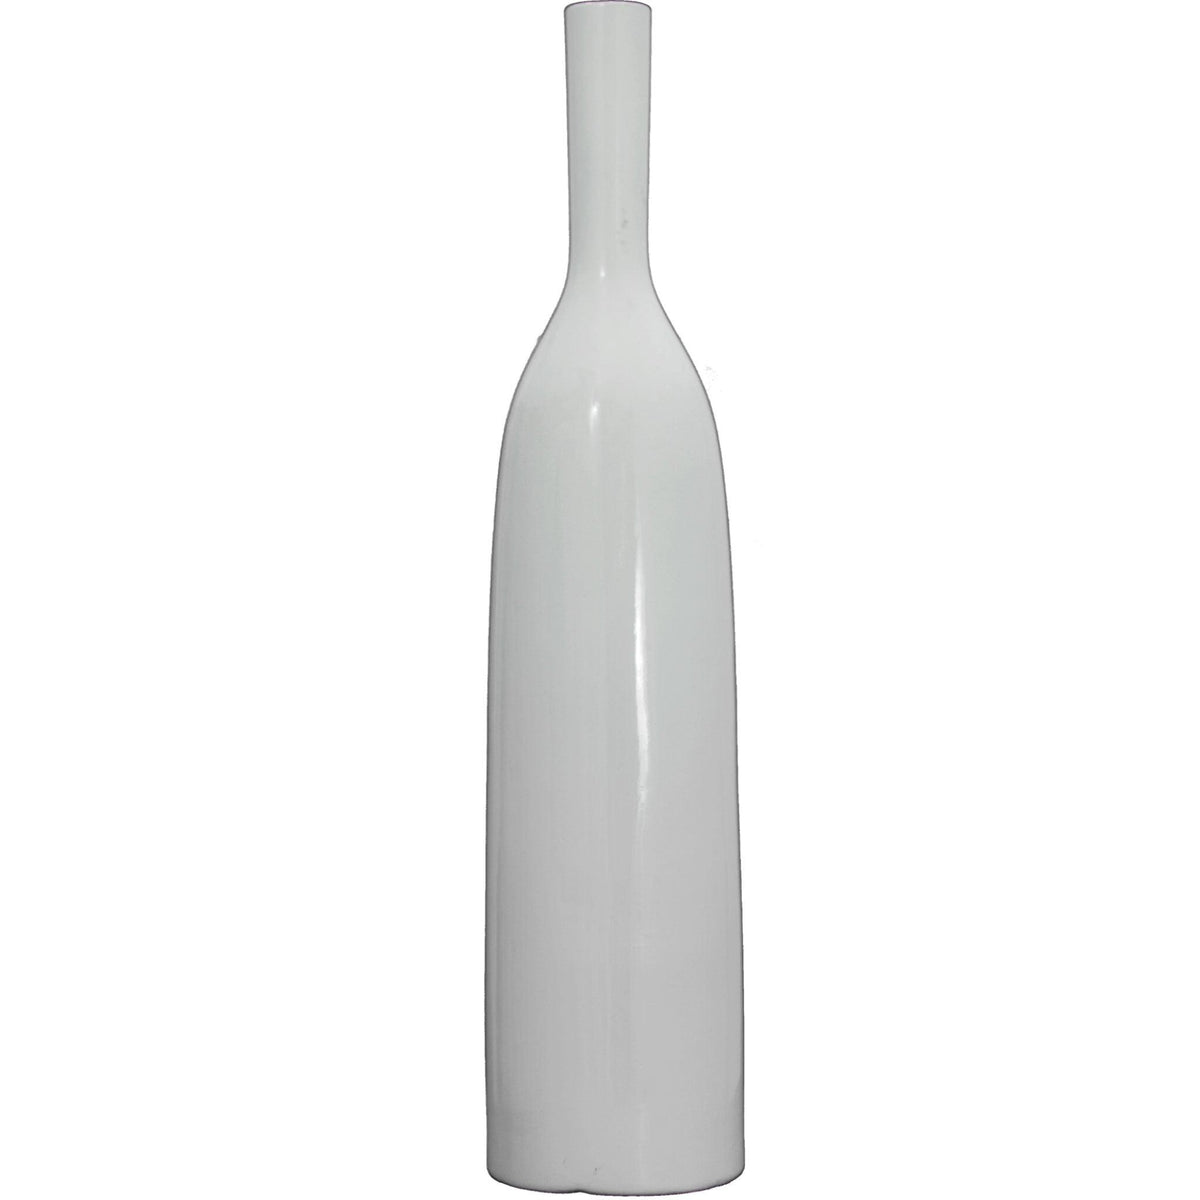 Lee Display's brand new Long Neck Ceramic Vase sold in high gloss white finish on sale at leedisplay.com